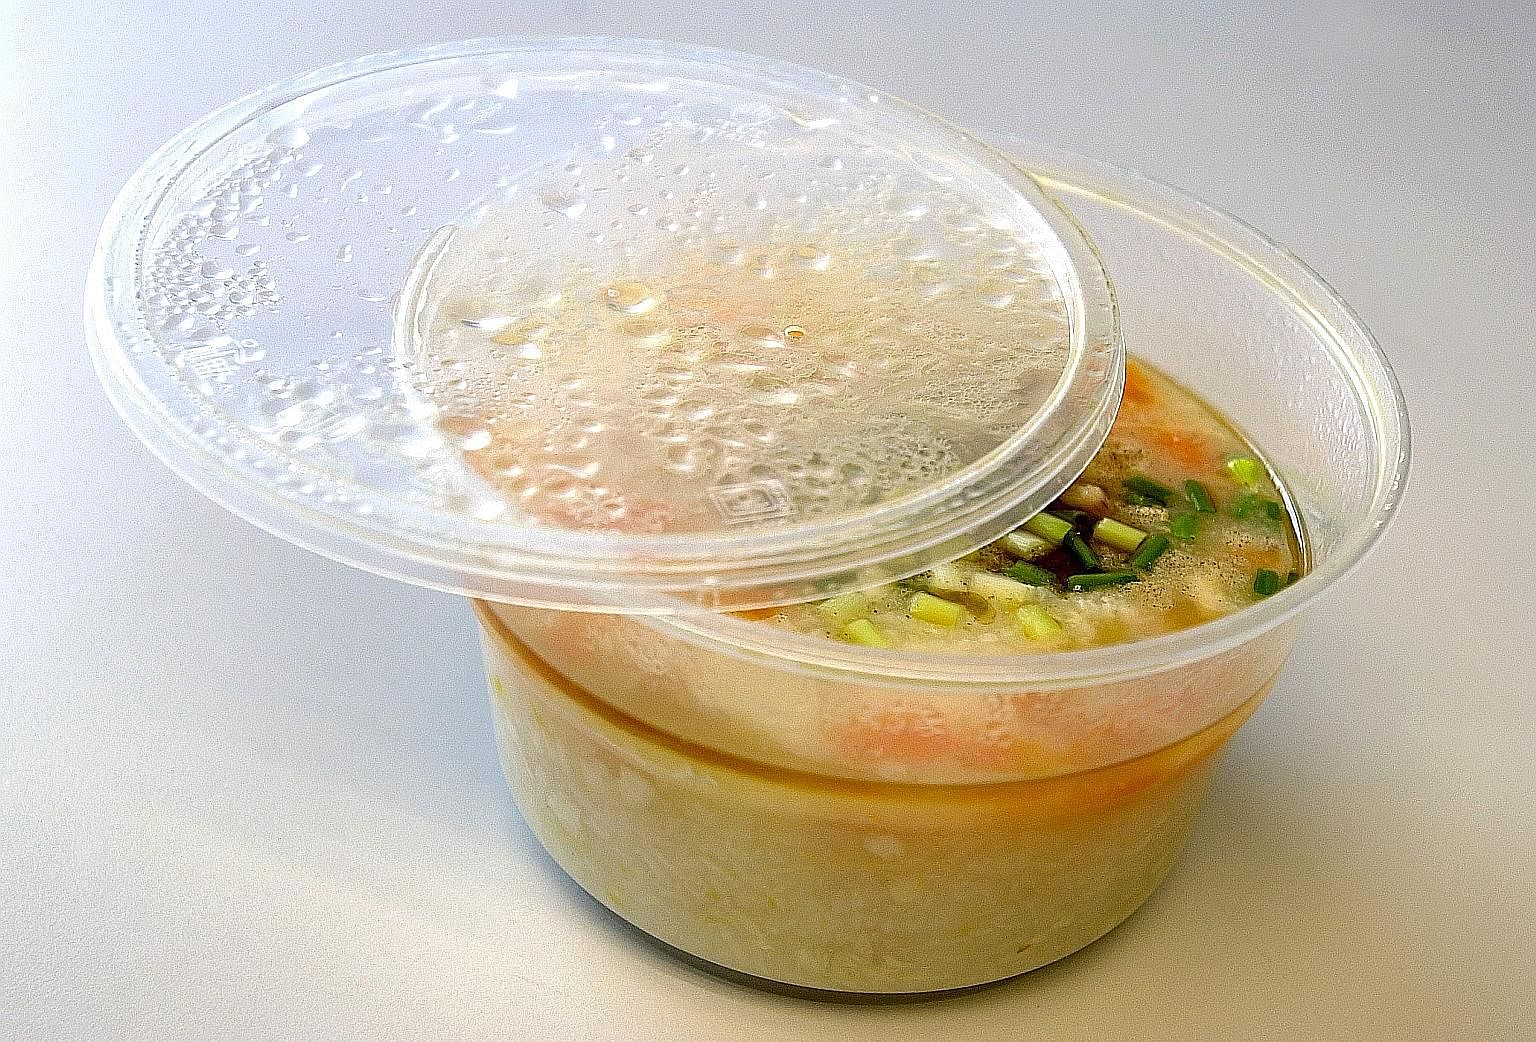 Consumers are advised to follow manufacturers' instructions on the proper use of plastic containers and their suitability for storage of hot food.